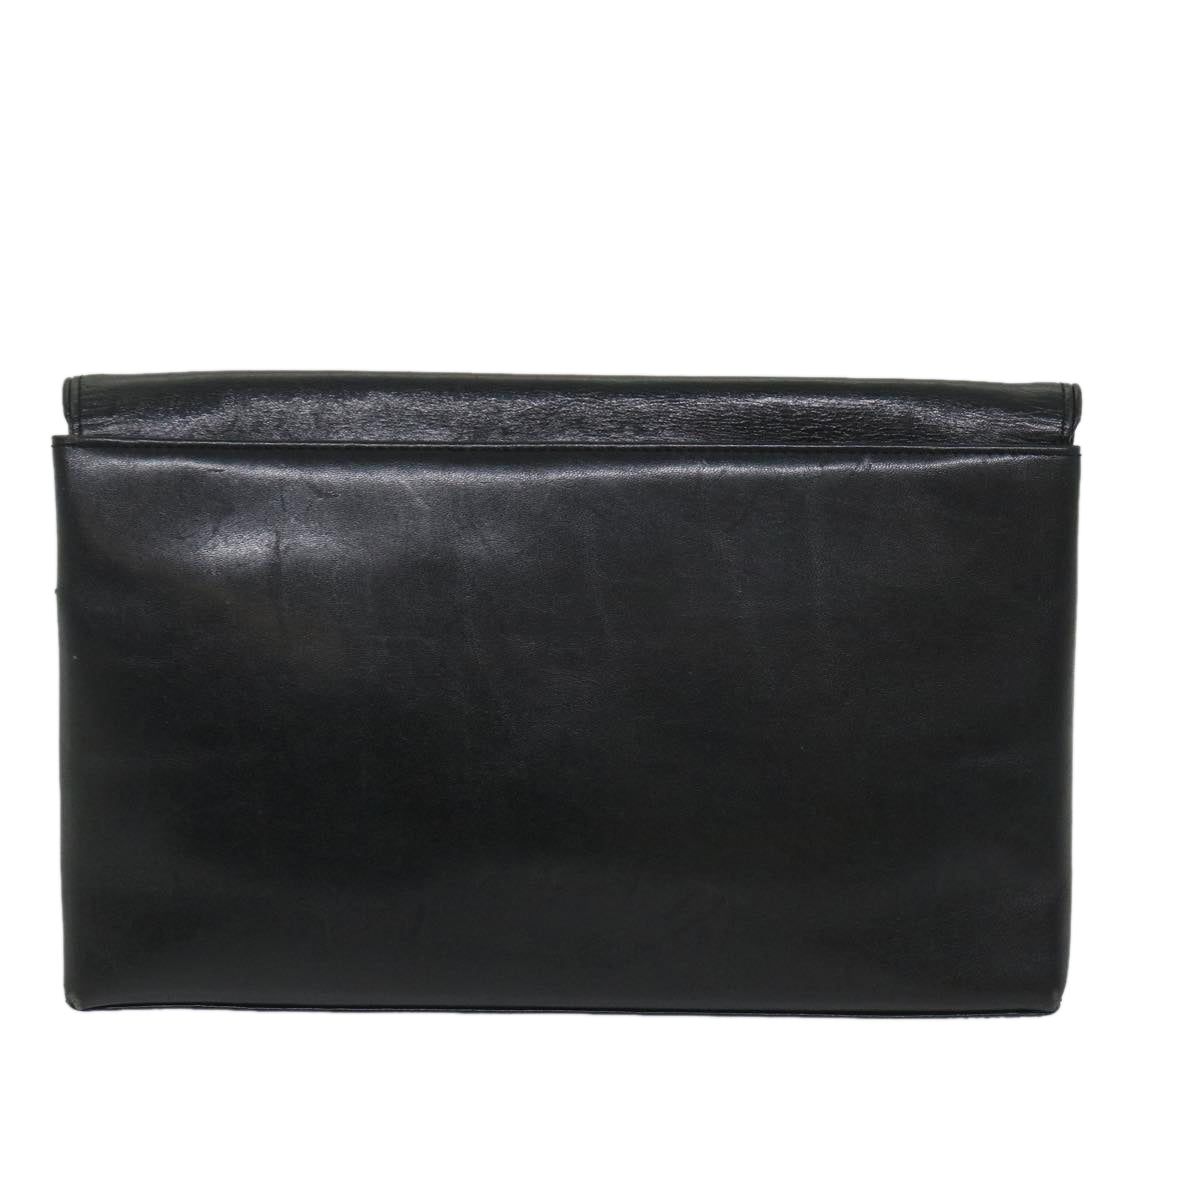 GIVENCHY Clutch Bag Leather Black Auth bs9173